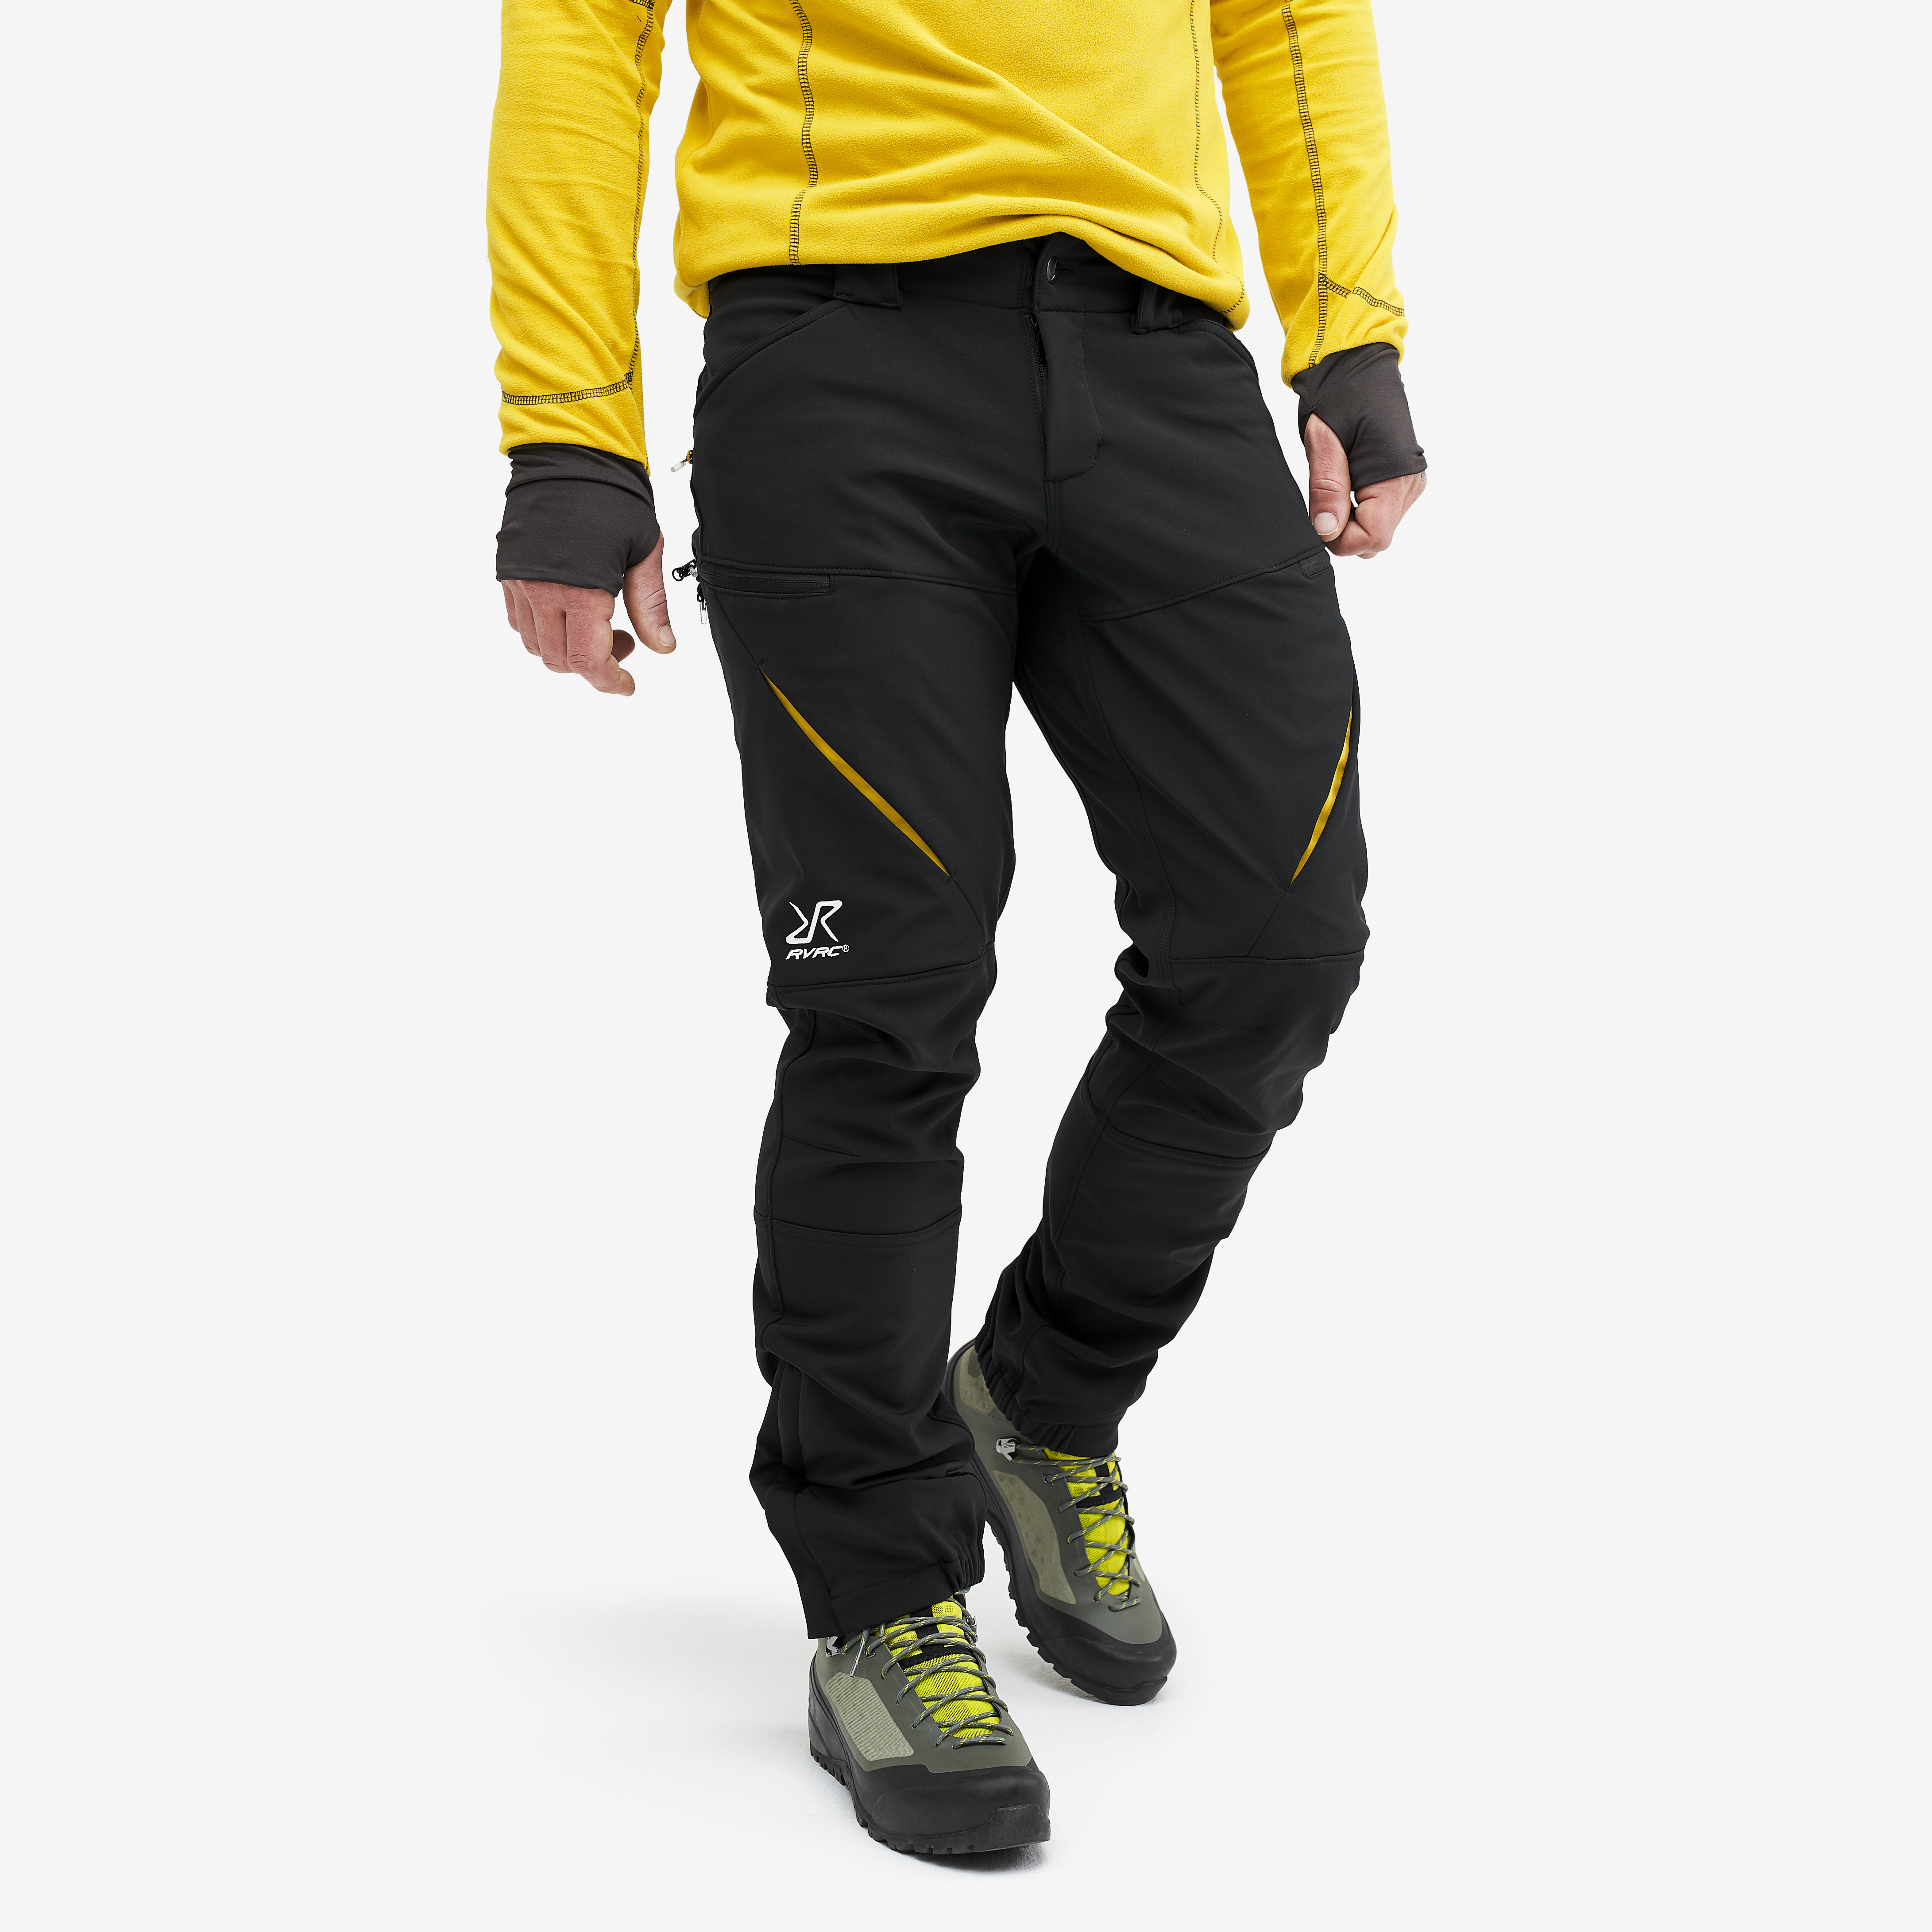 RevolutionRace Men’s Hiball Pants Durable and Ventilated Pants for All Outdoor Activities 